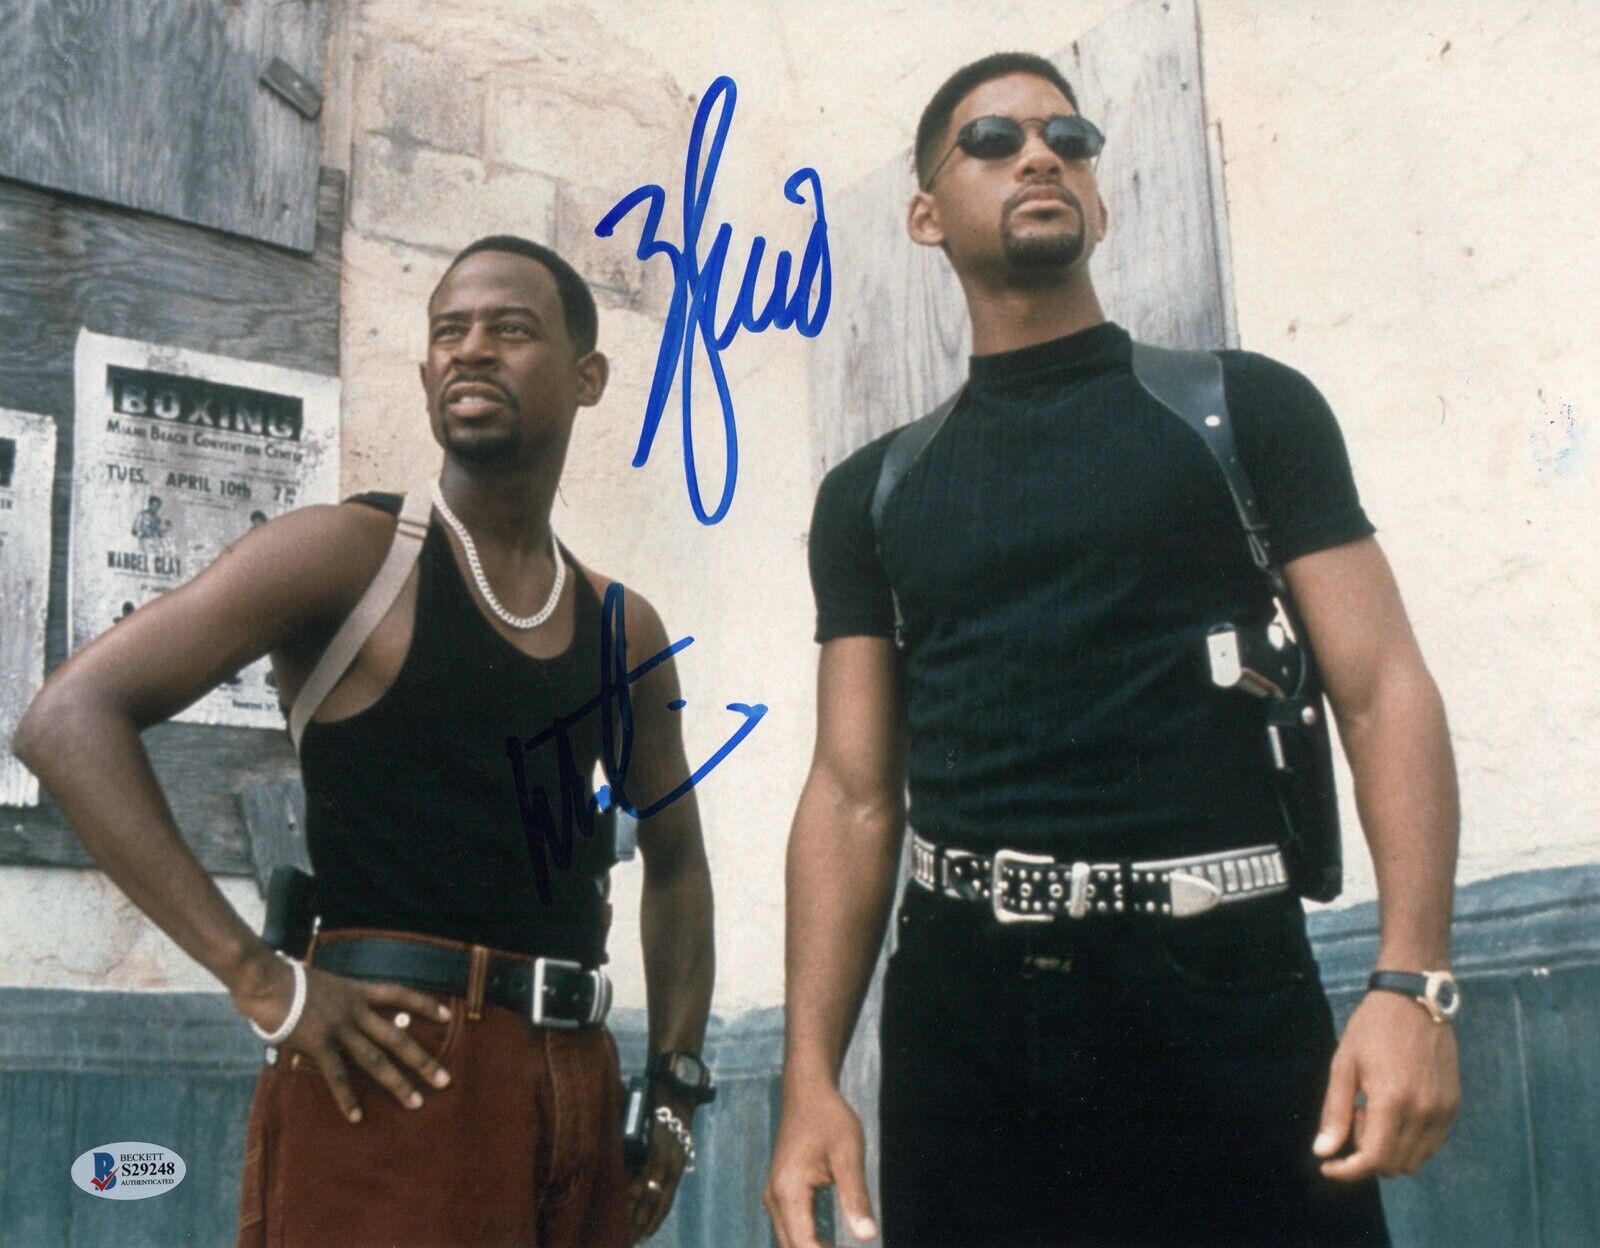 MARTIN LAWRENCE WILL SMITH SIGNED AUTO BAD BOYS 11X14 PHOTO AUTHENTIC BECKETT